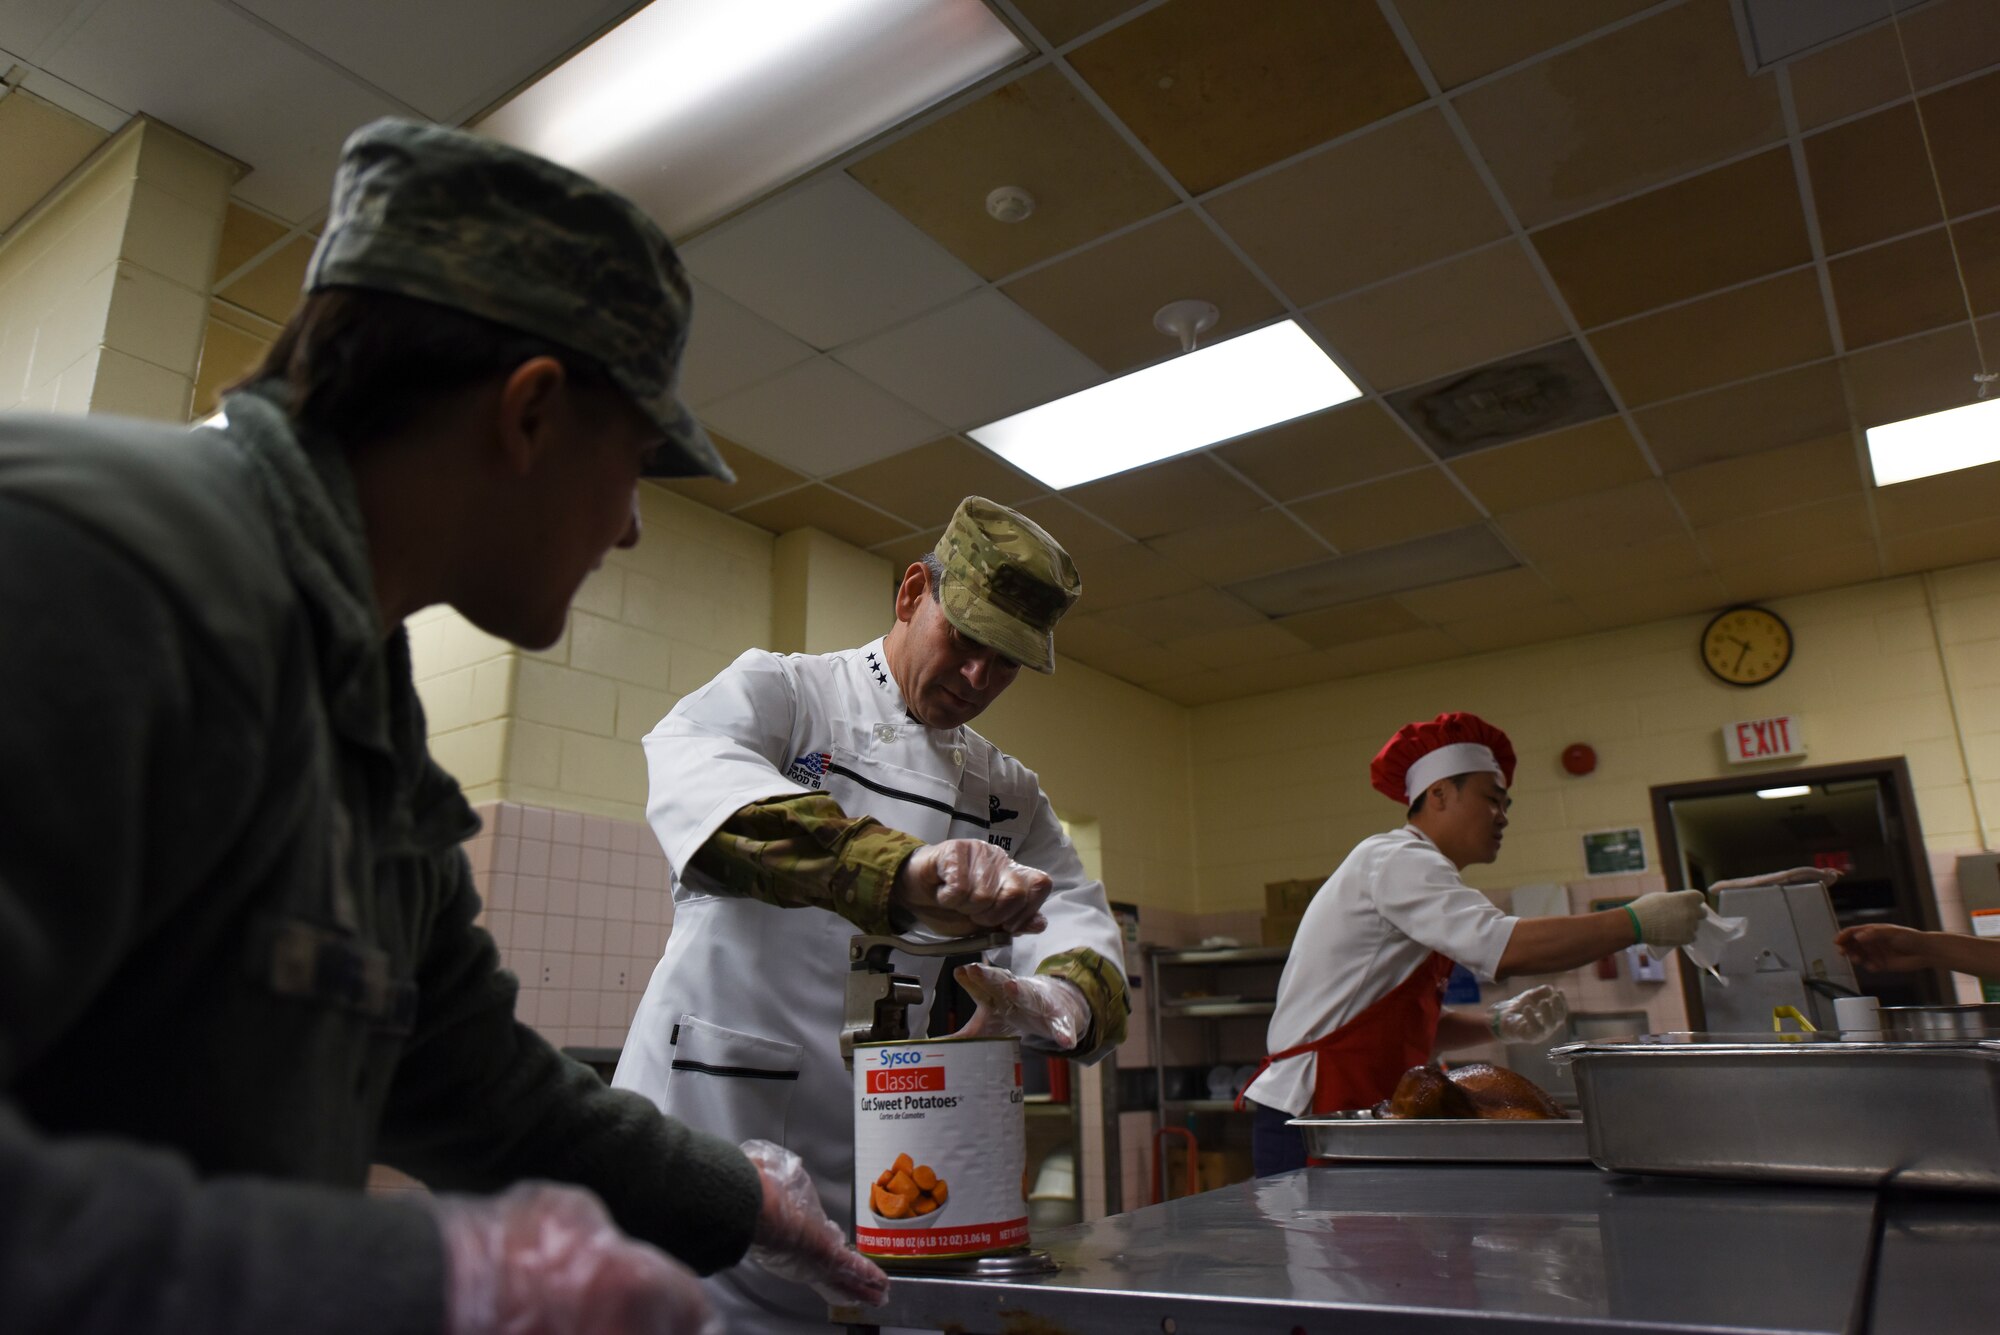 U.S. Air Force Lt. Gen. Kenneth Wilsbach, Seventh Air Force commander, opens a can of potatoes on Thanksgiving at Kunsan Air Base, Republic of Korea, Nov. 22, 2018. Gen. Wilsbach, his wife, Cynthia, and other members of Seventh Air Force leadership joined base leadership as they prepared and served a Thanksgiving meal to Airmen. (U.S. Air Force photo by Senior Airman Savannah L. Waters)